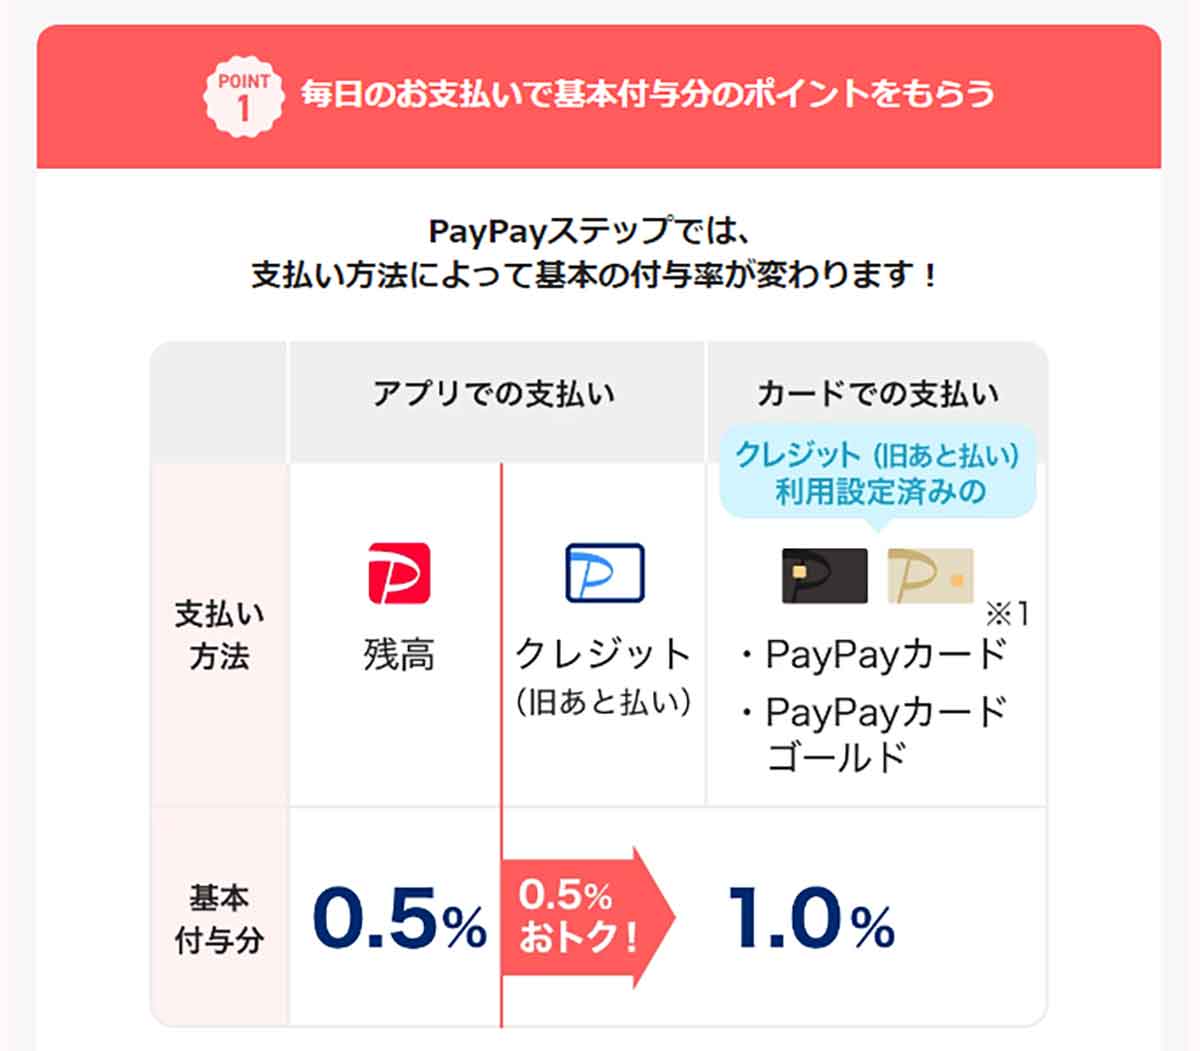 PayPay「PayPayステップ」2